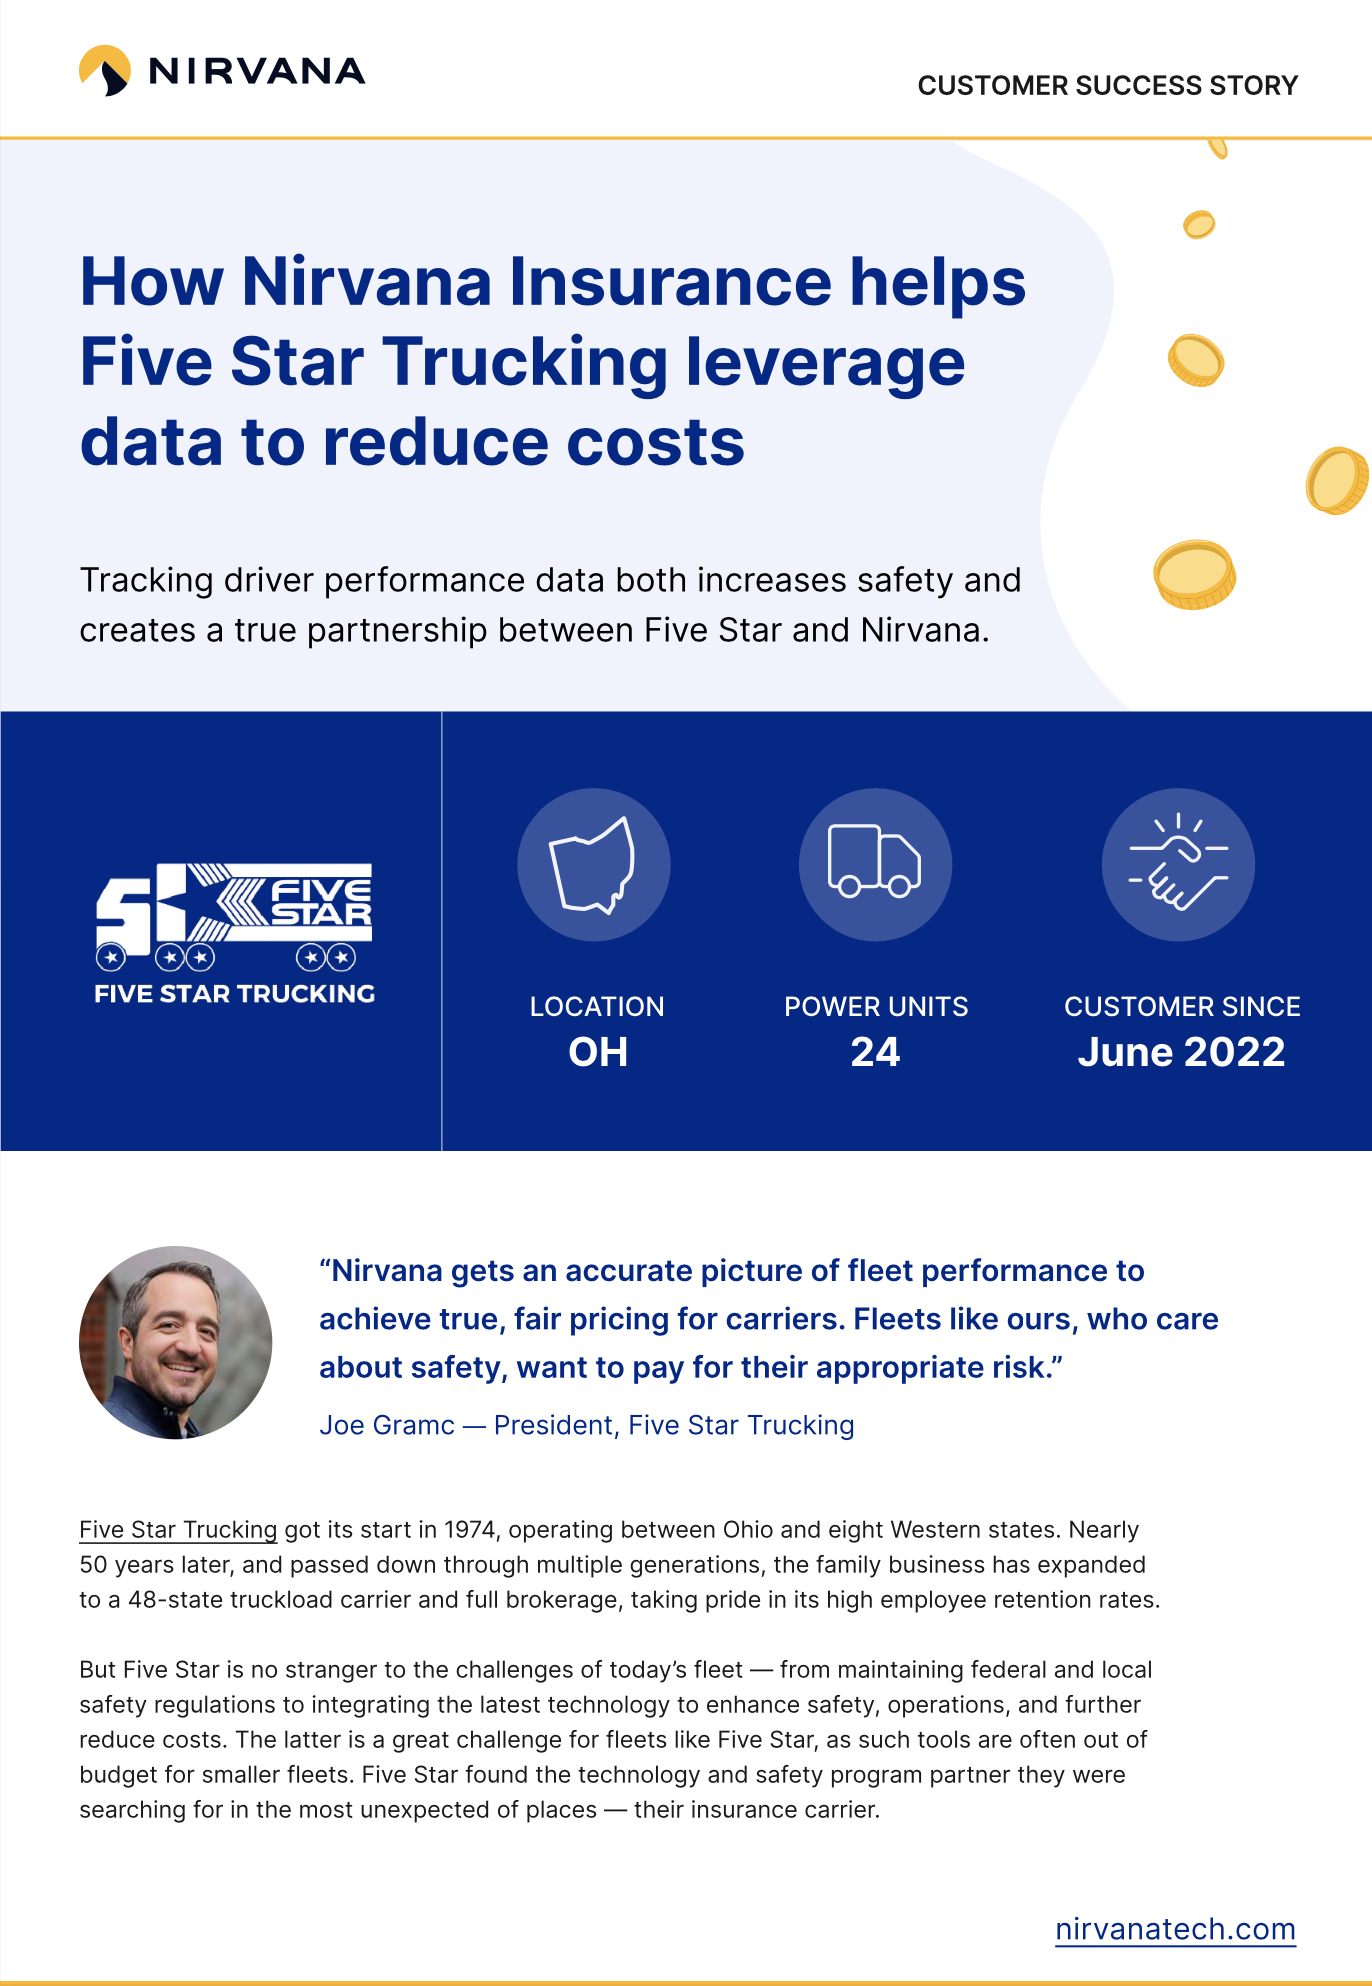 How Nirvana Insurance helps Five Star Trucking leverage data to reduce costs